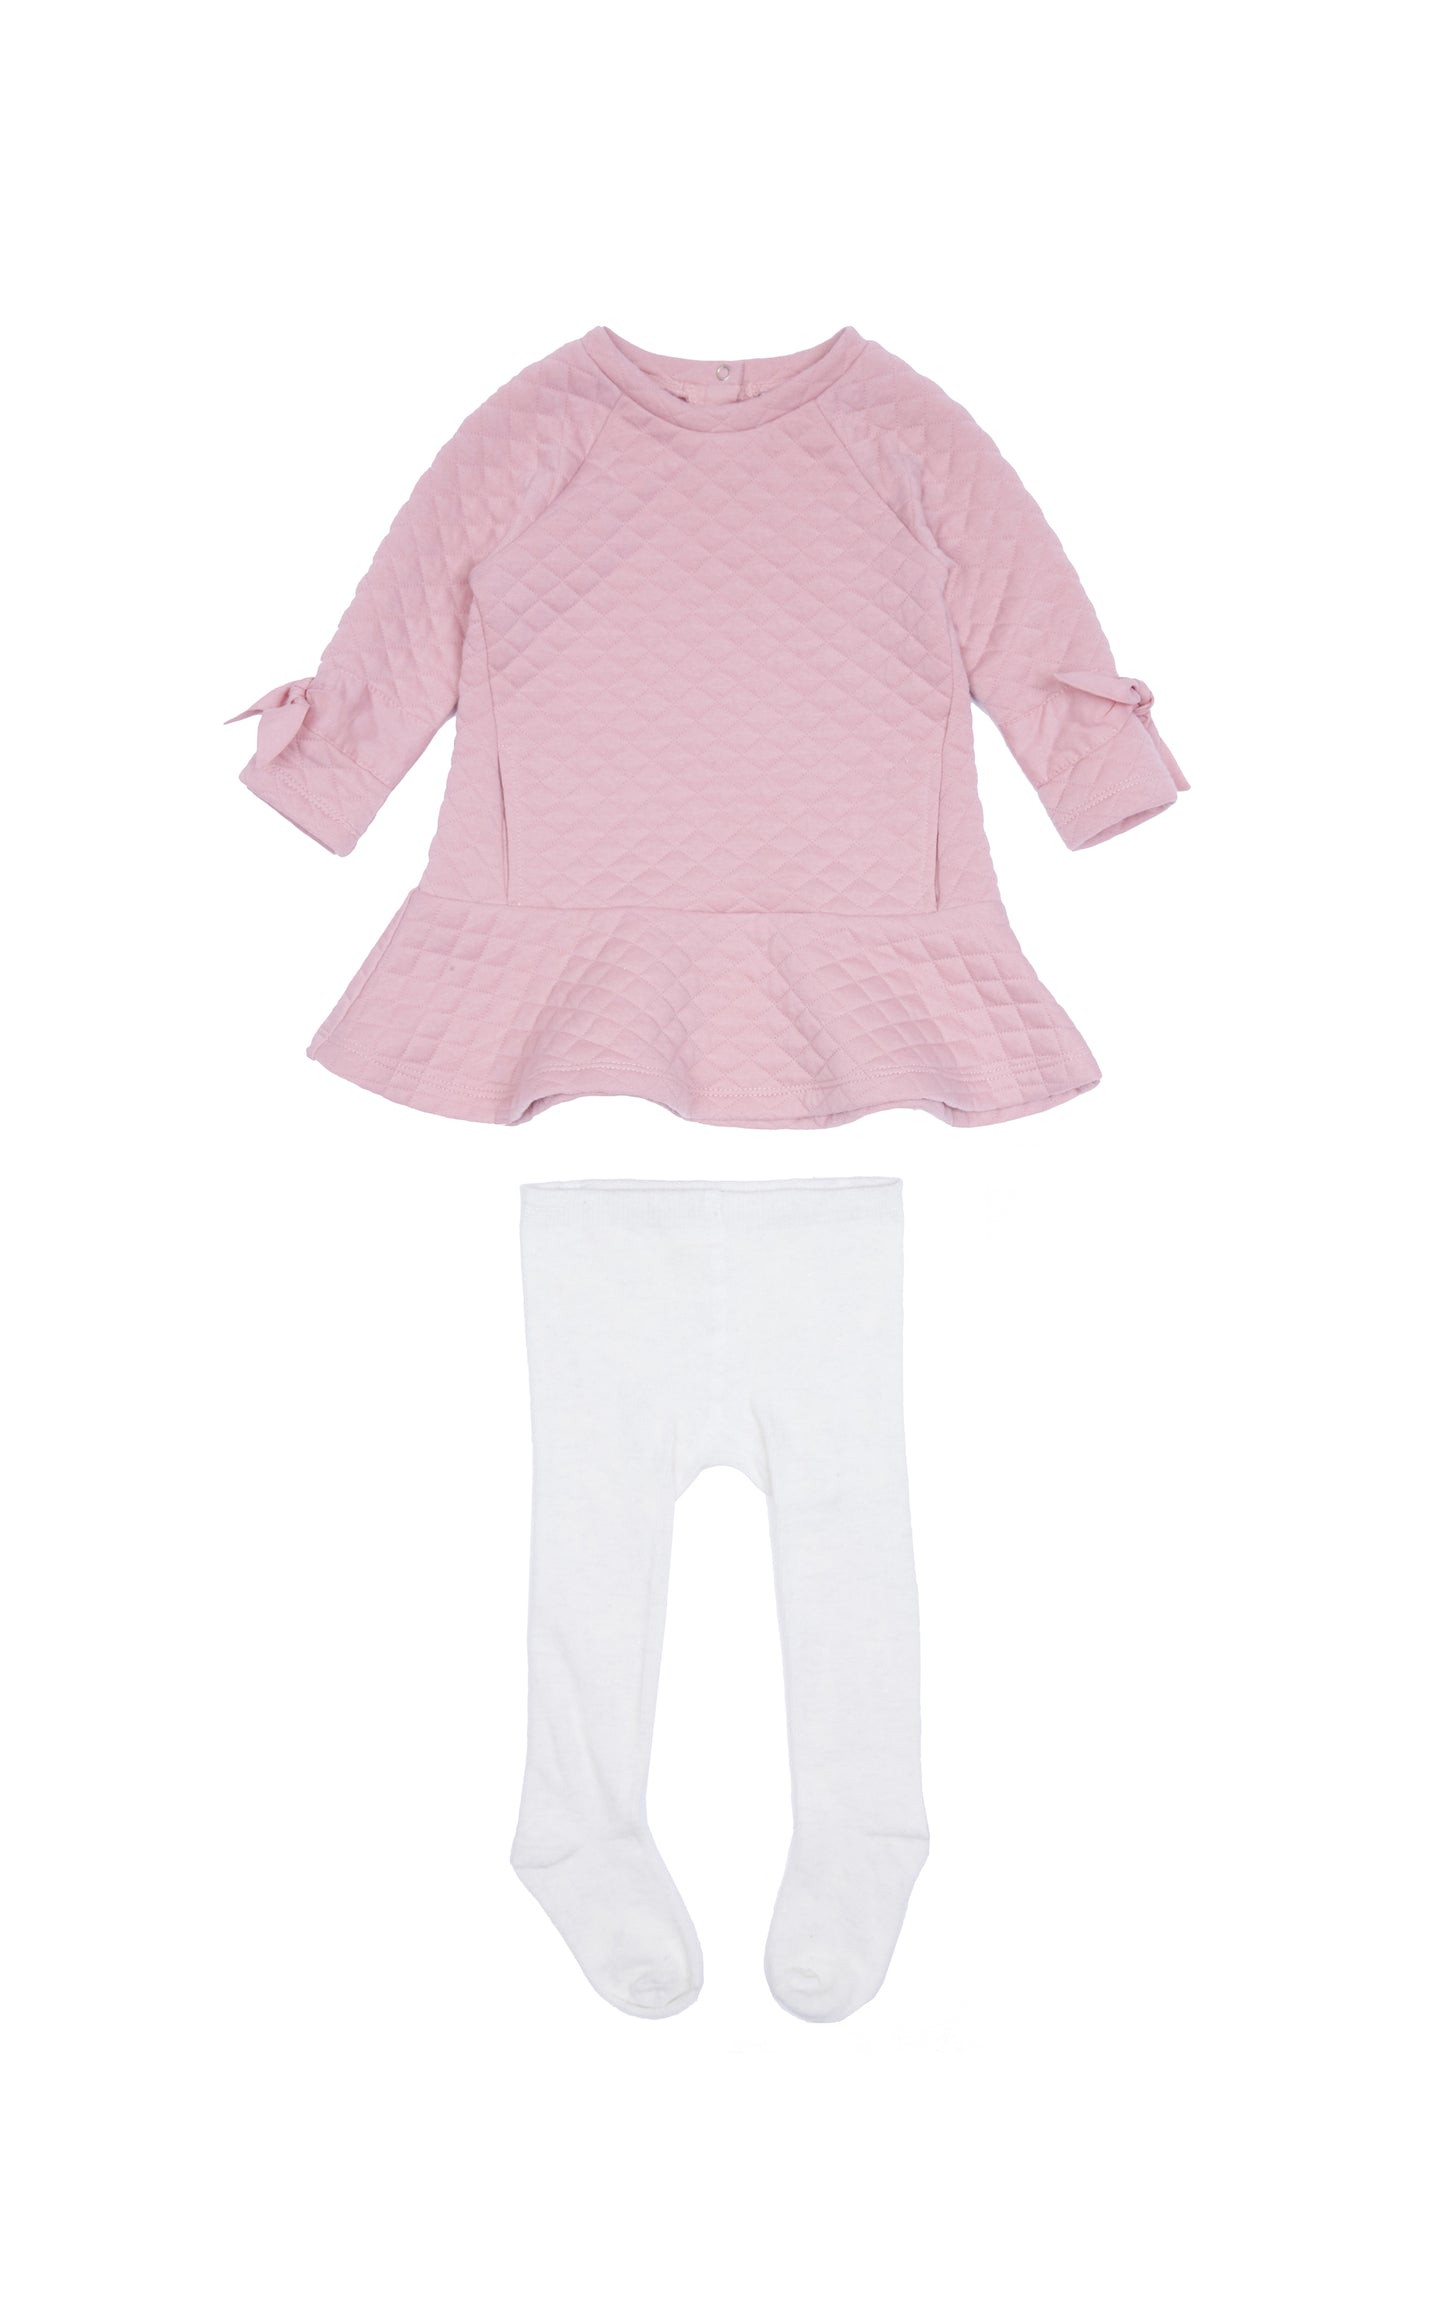 Long-sleeve pink dress with quilted texture and bows on sleeves with white tights.